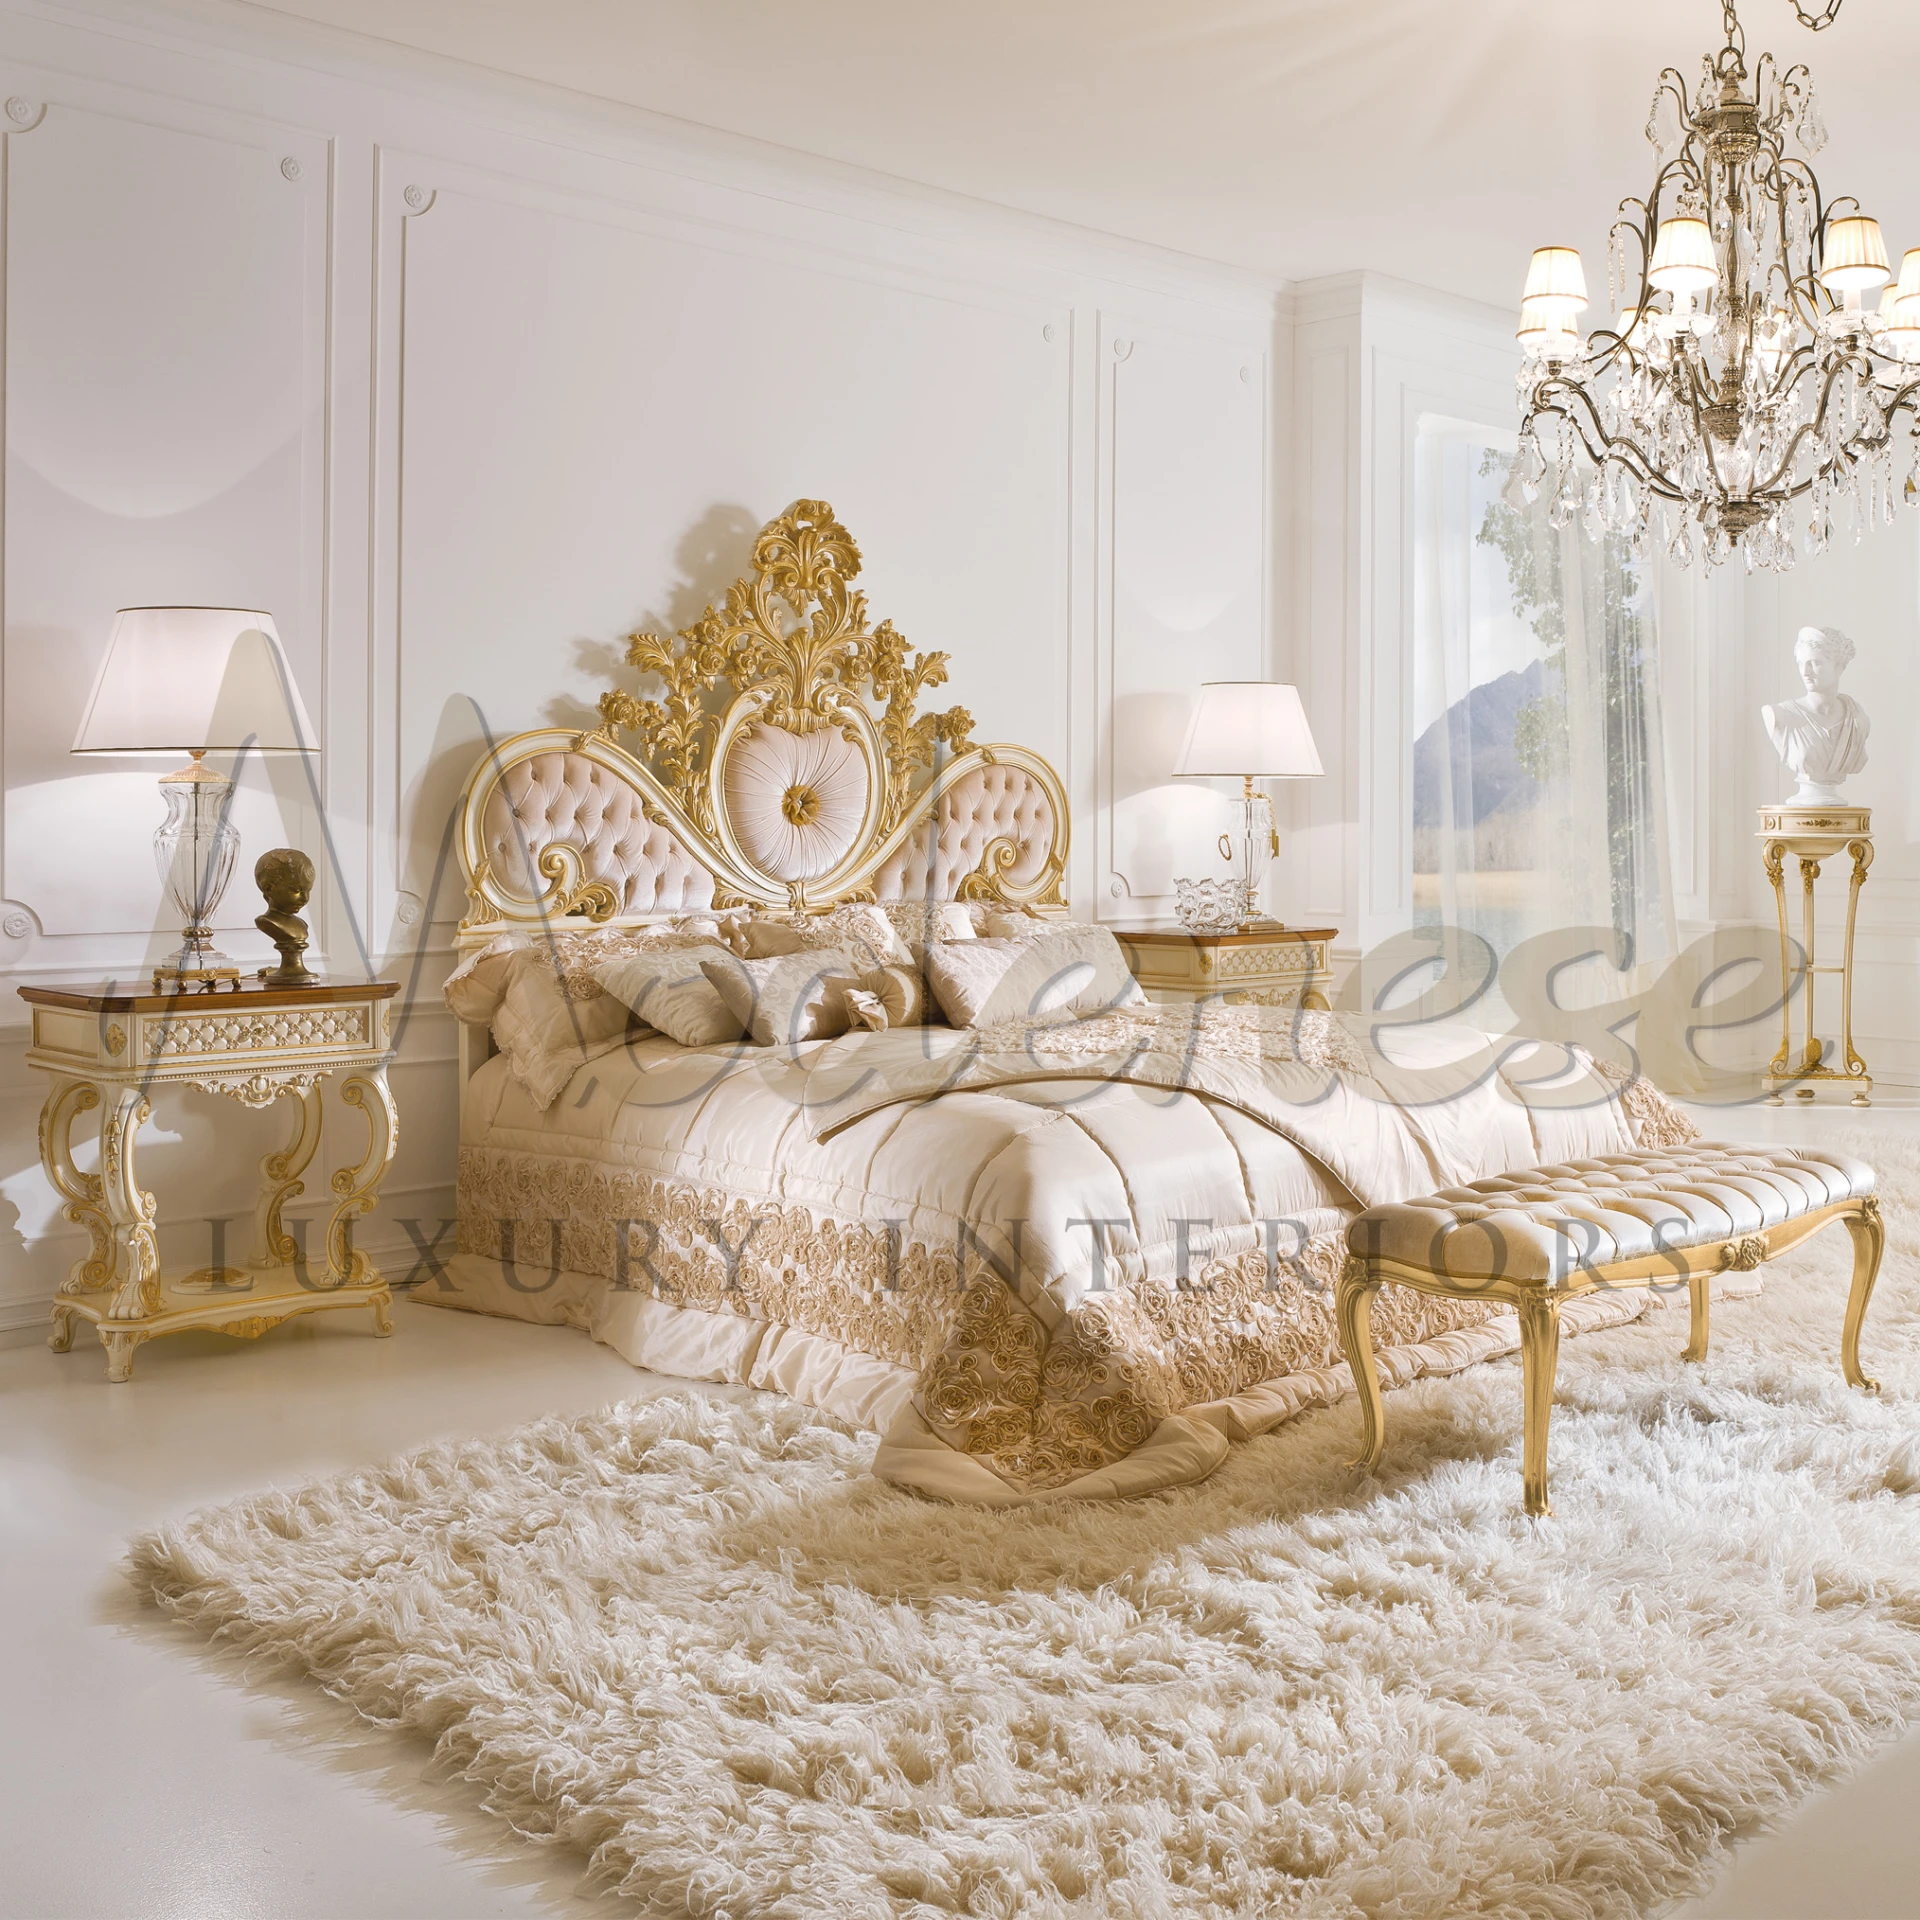 Transform your bedroom into a palace with our Royal Style Double Bed. Majestic design meets unparalleled comfort for a truly opulent sleeping experience.